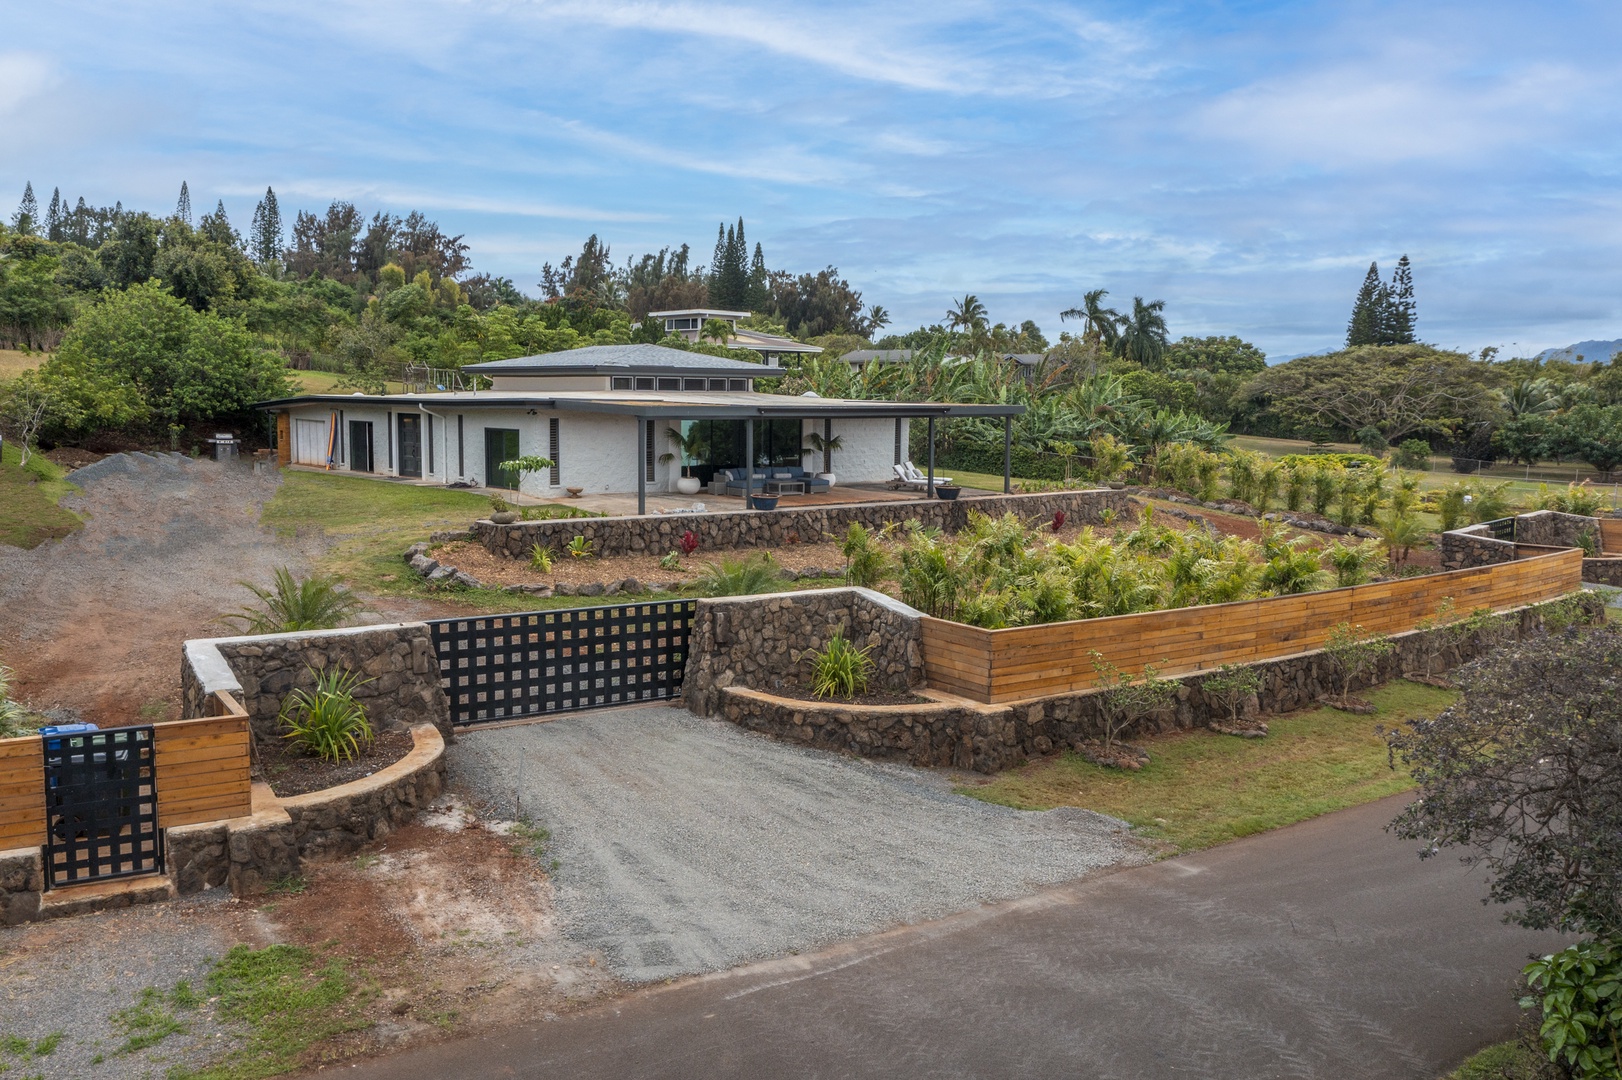 Haleiwa Vacation Rentals, Hale Mahina - Automatic gates for entry into the property